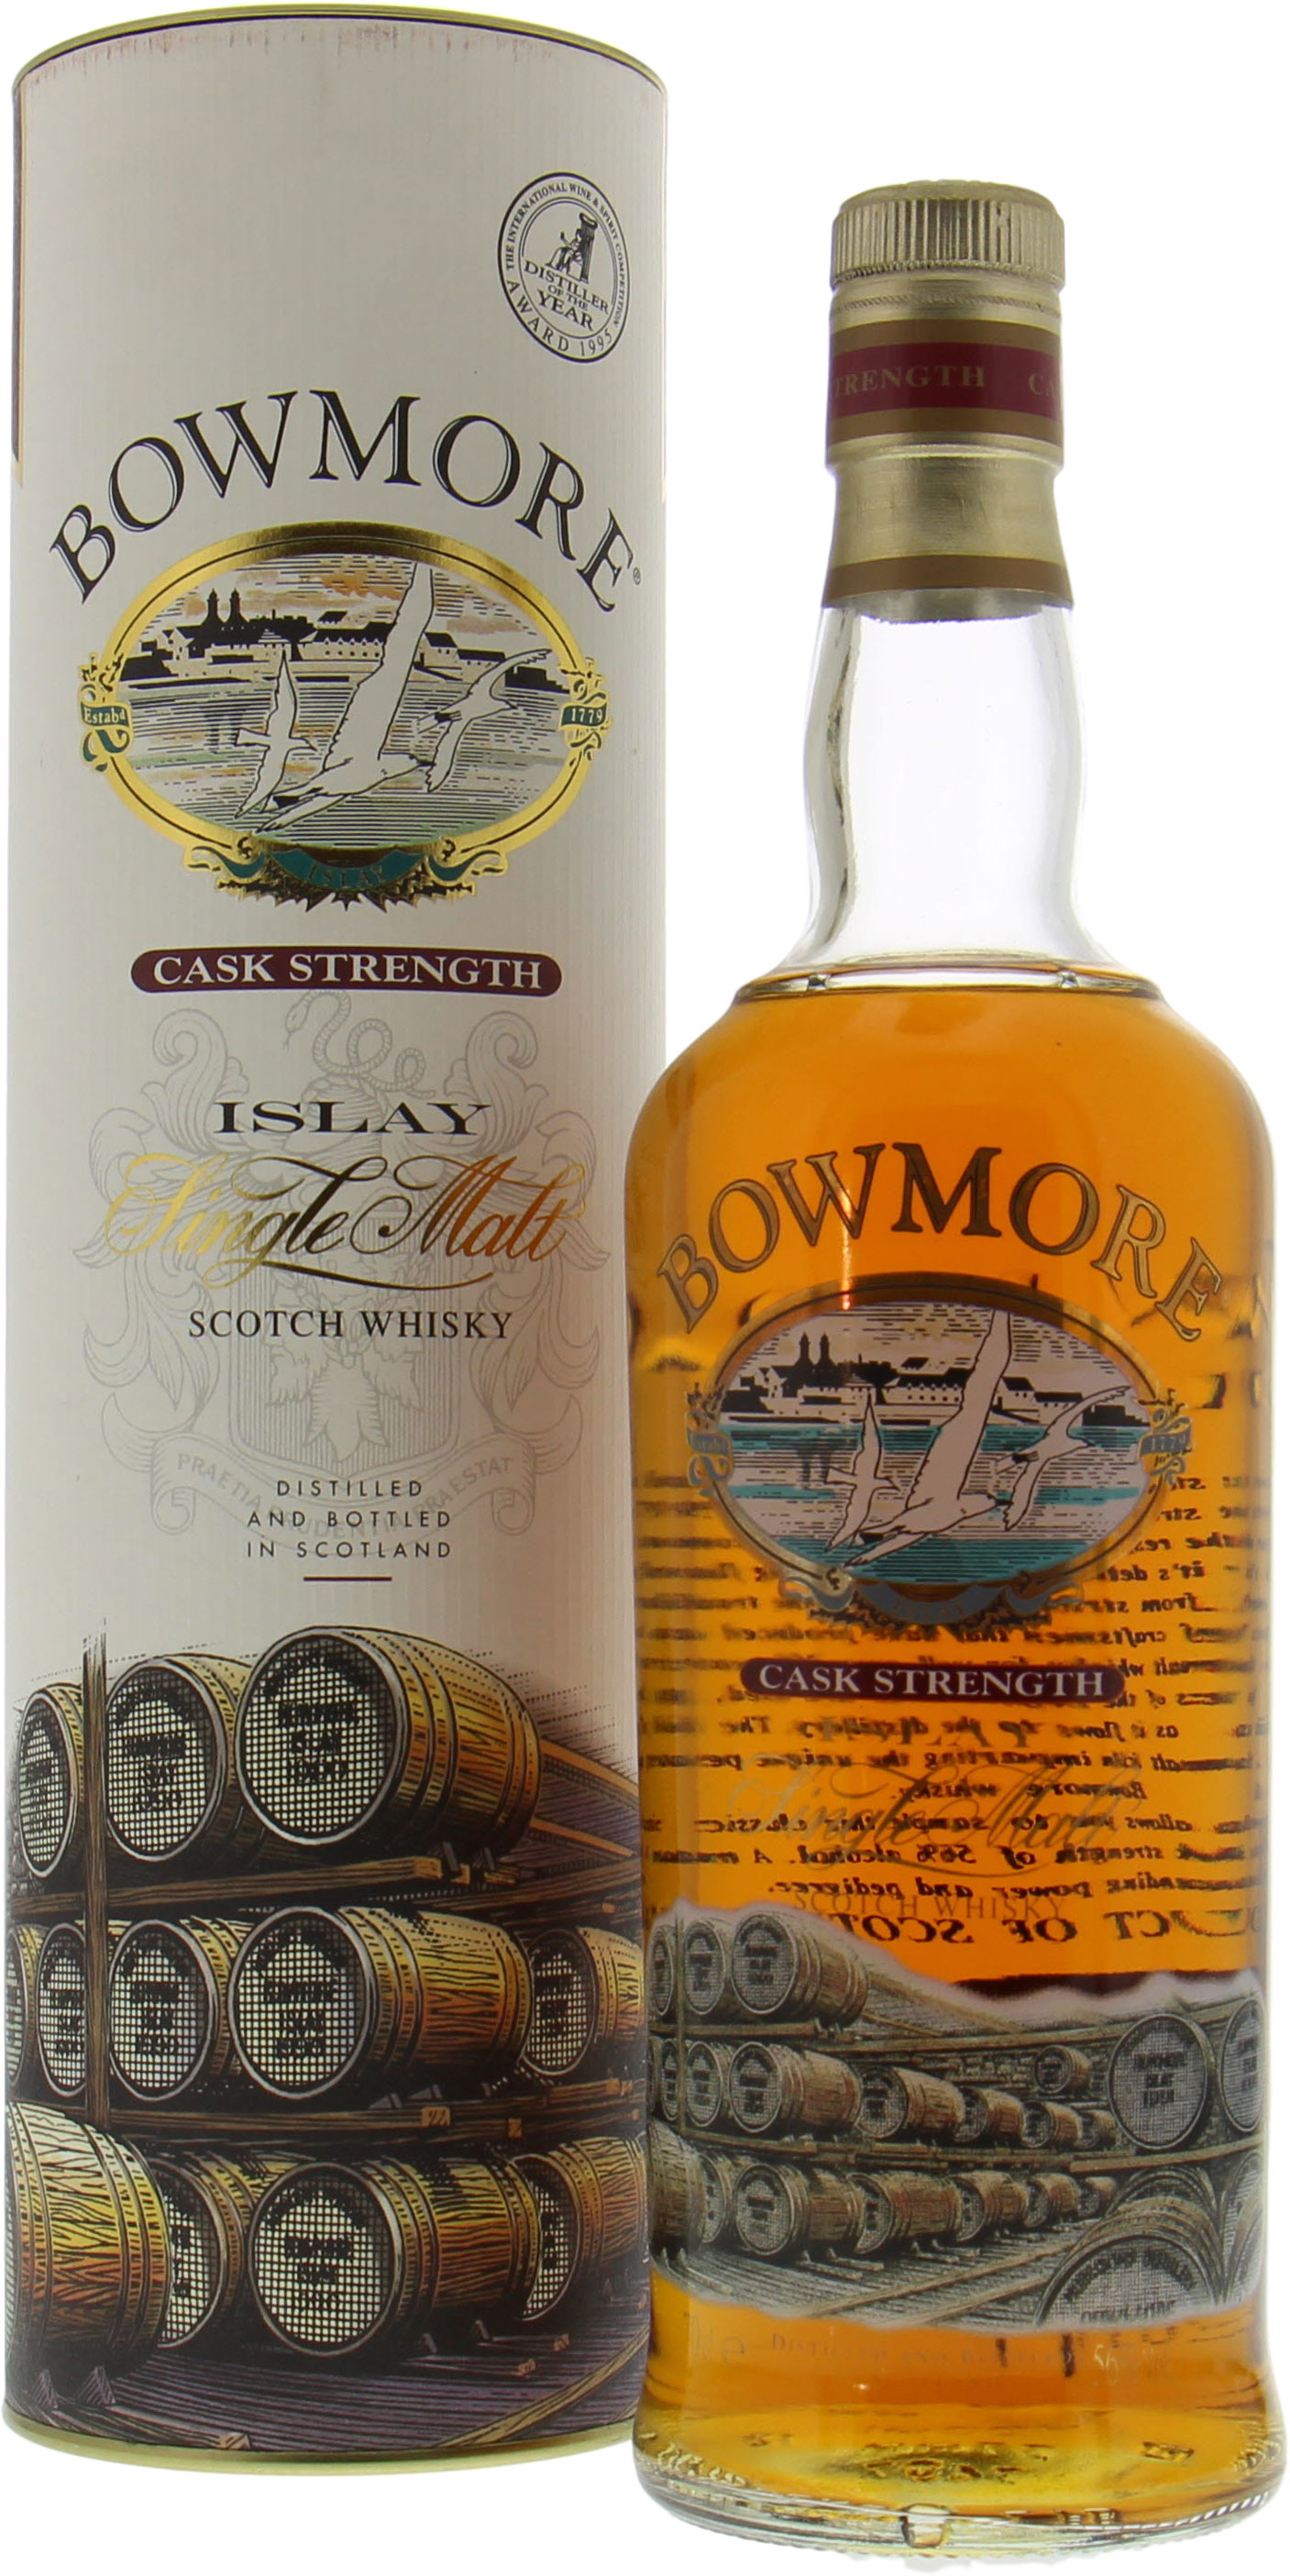 Bowmore - Cask Strength Glass Printed Label red striped capsule 56% NV